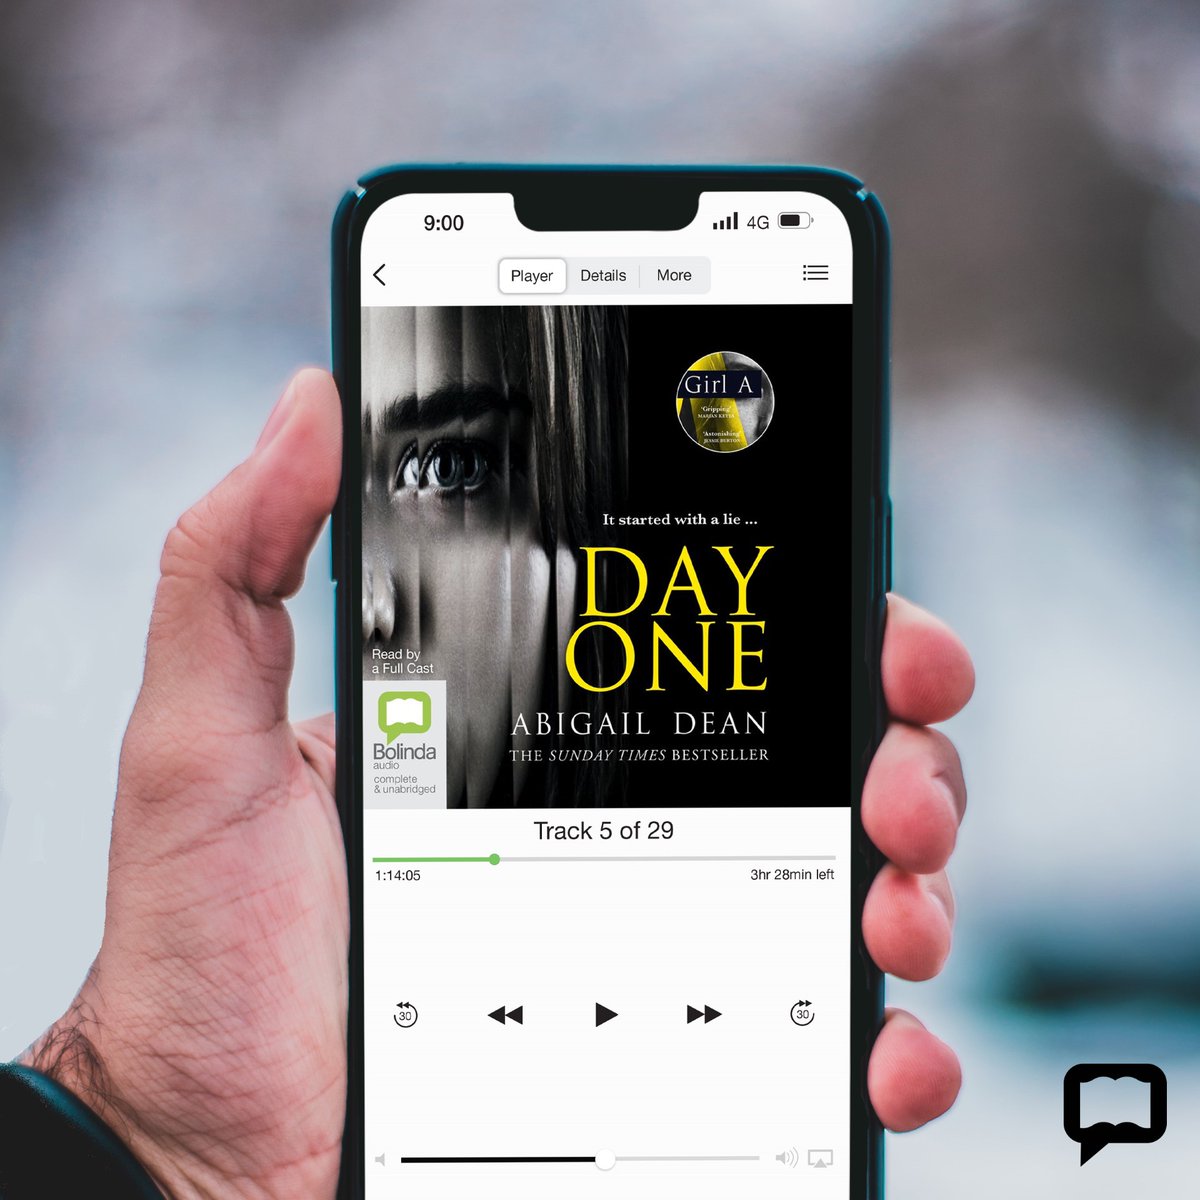 From the international bestselling author of Girl A, discover Abigail Dean’s new stunning, layered and moving mystery, Day One Available now on BorrowBox sefton.borrowbox.com